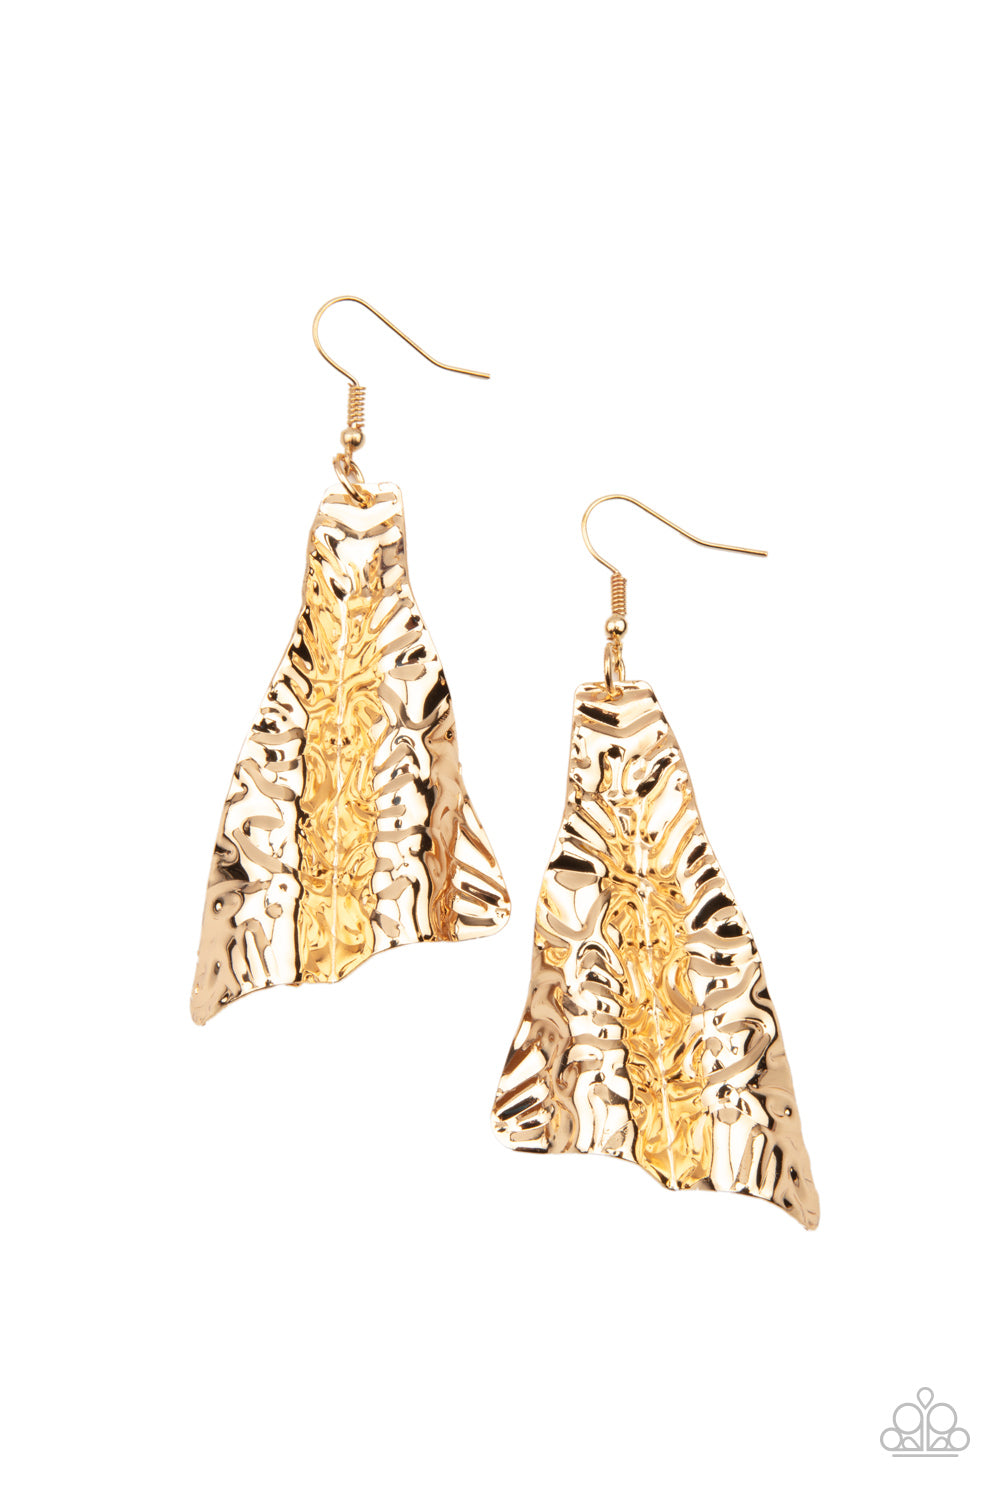 How FLARE You! - Gold Earrings - Paparazzi Accessories